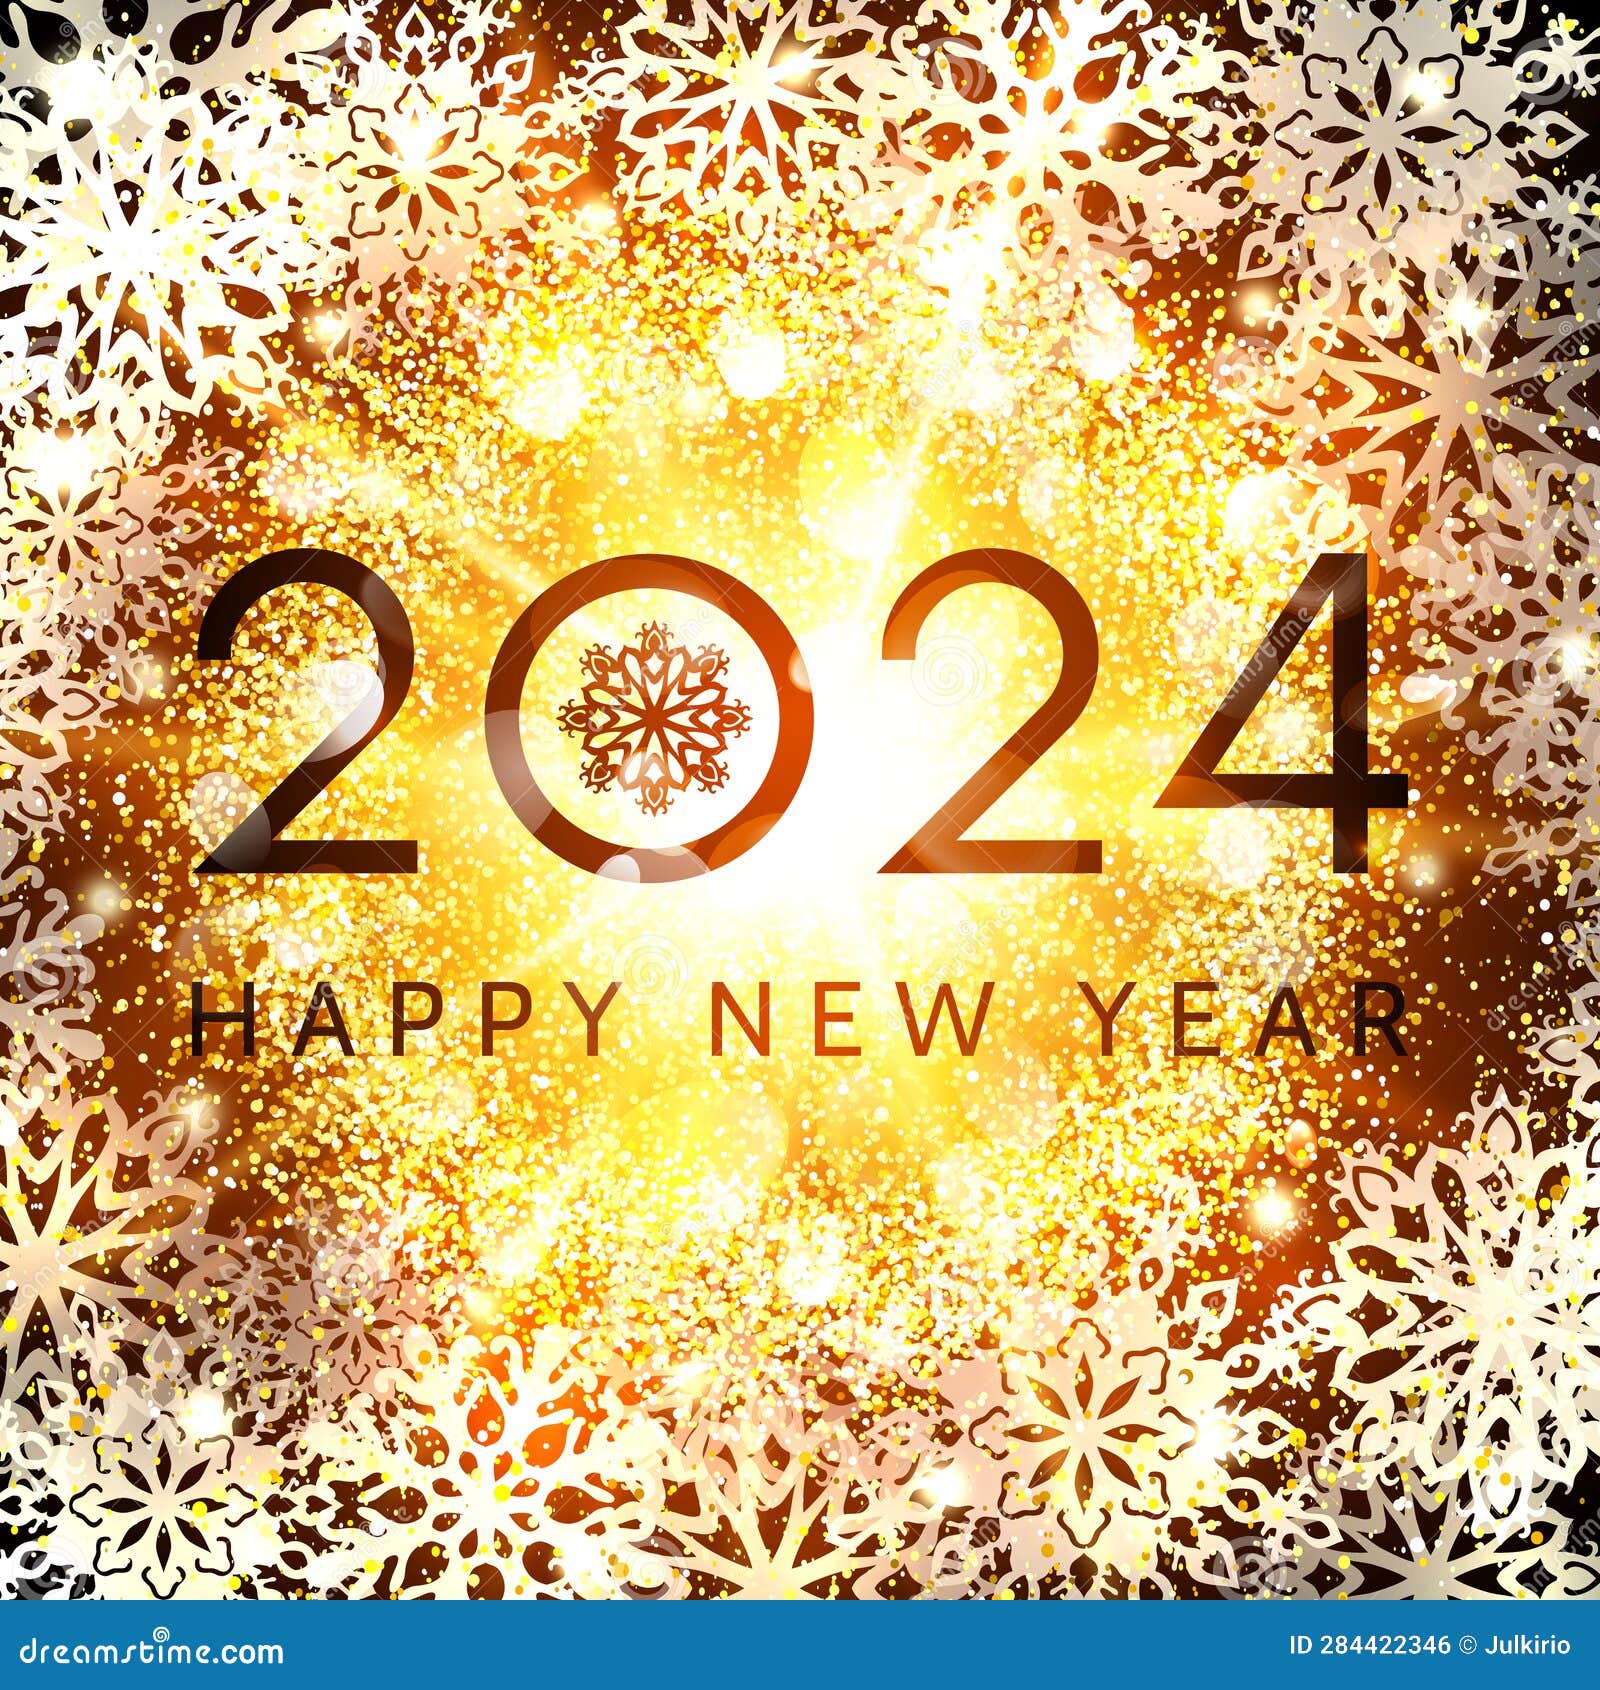 happy new year 2024 greeting card  on glowing abstract background with glittering confetti s and snowflakes